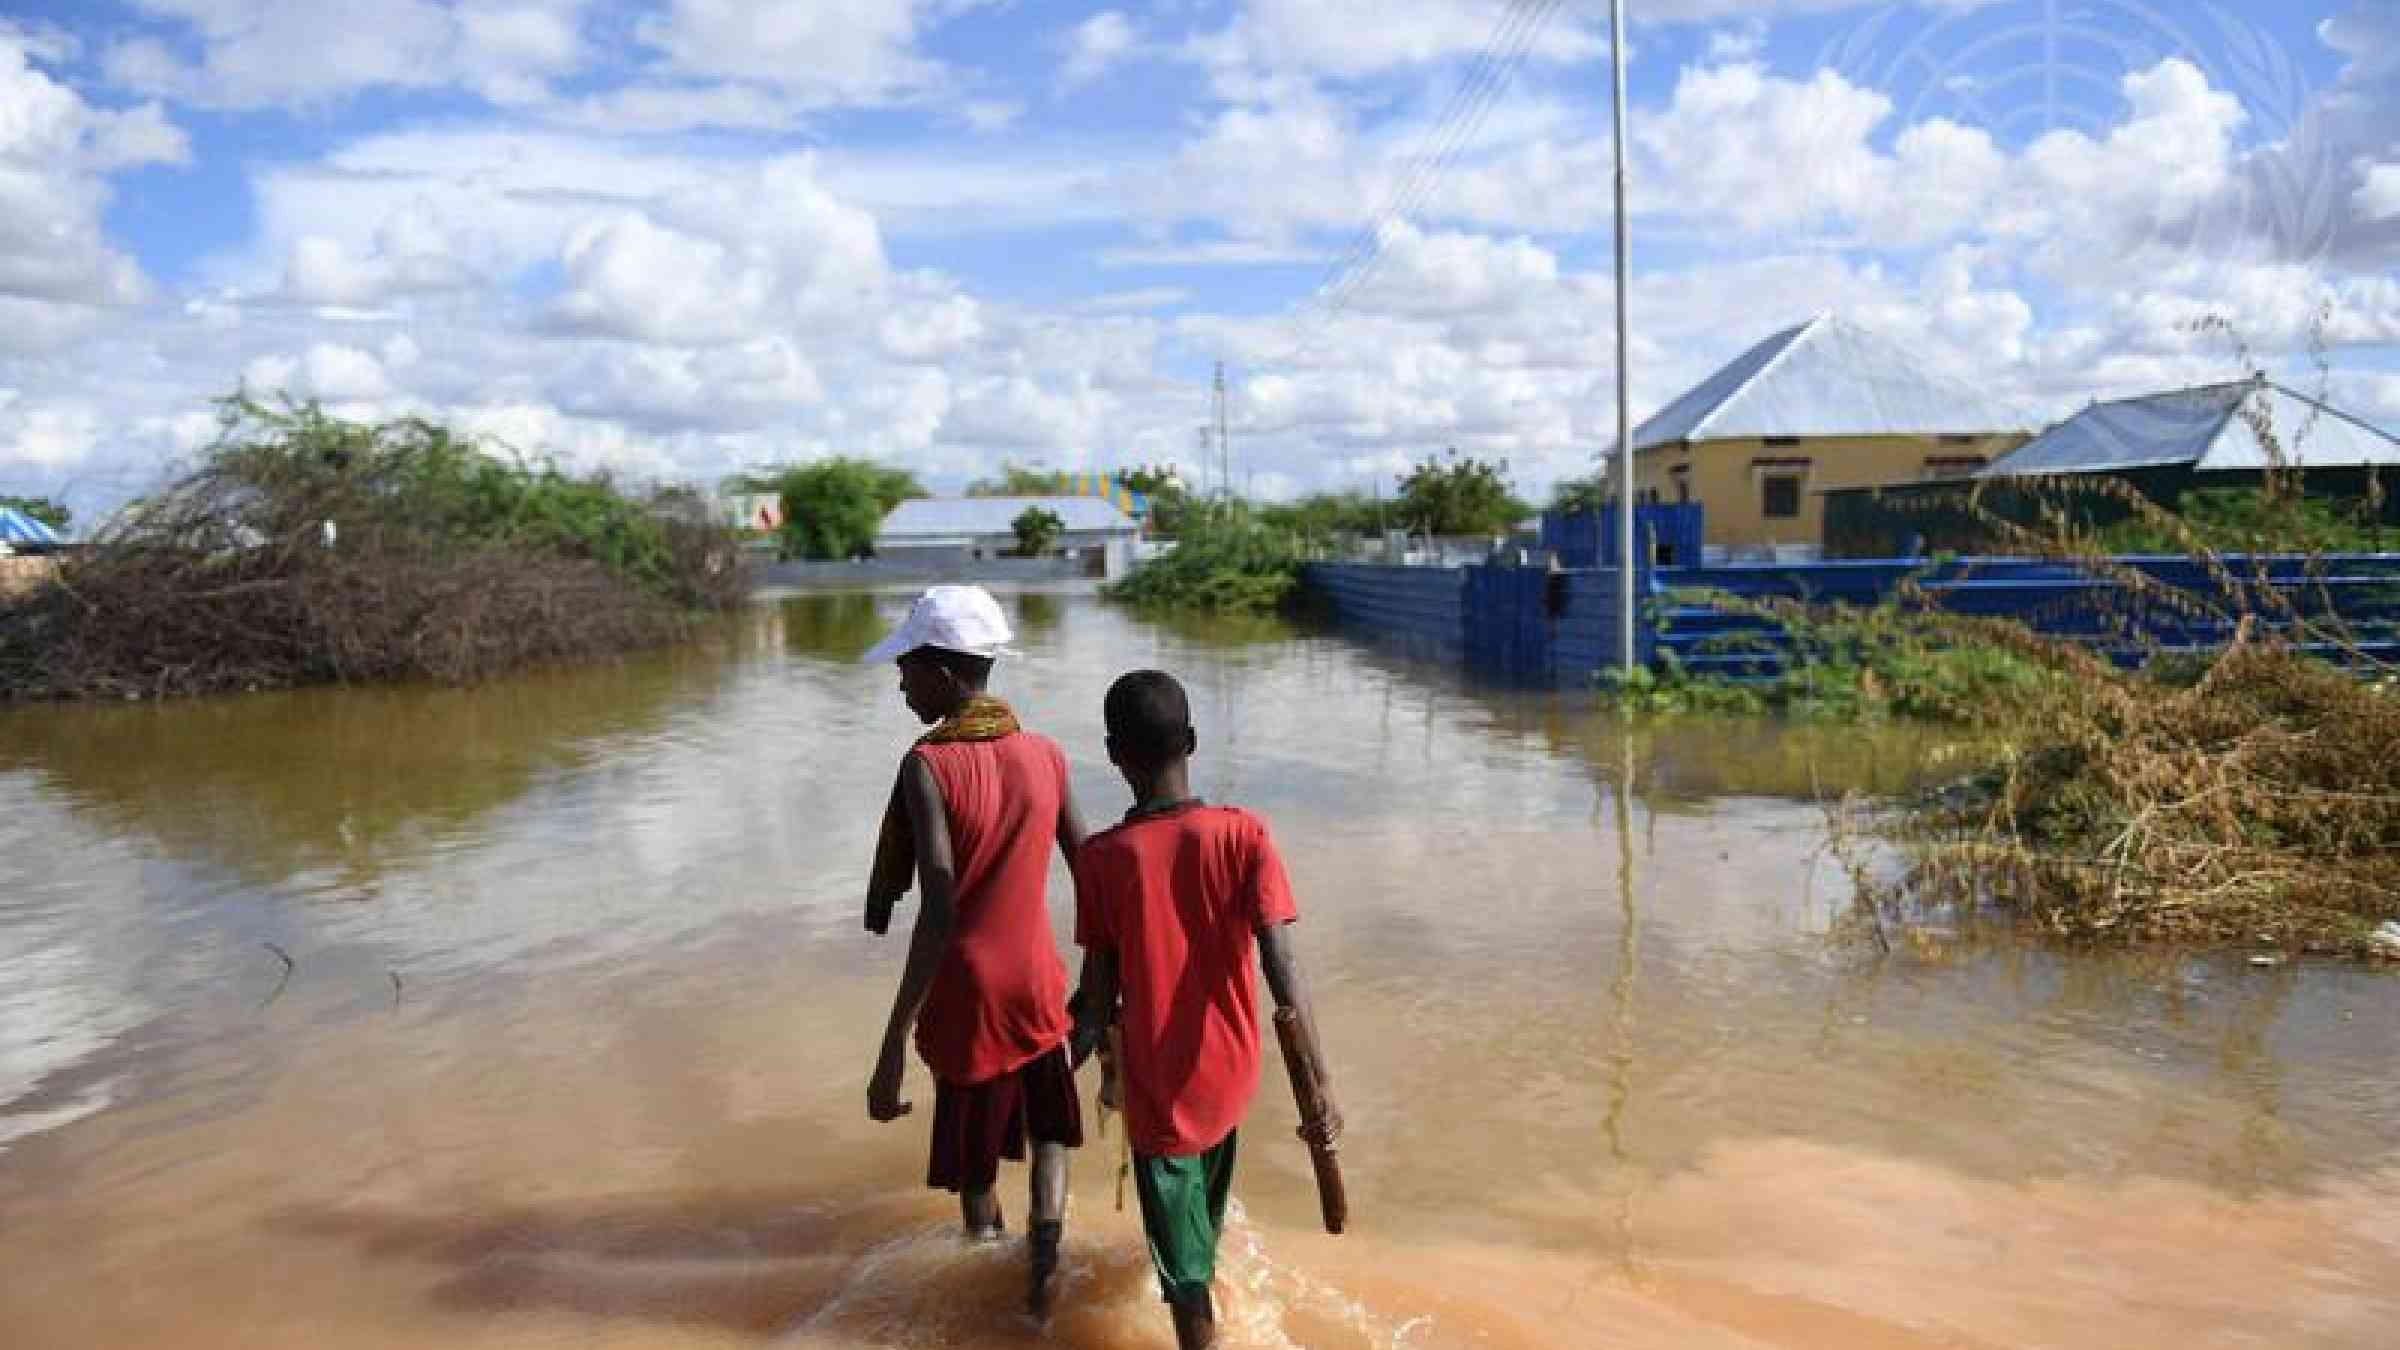 Young boys of Hawa-taako walk through a section of the flooded residential area in Belet Weyne, Somalia (2018). UN Photos